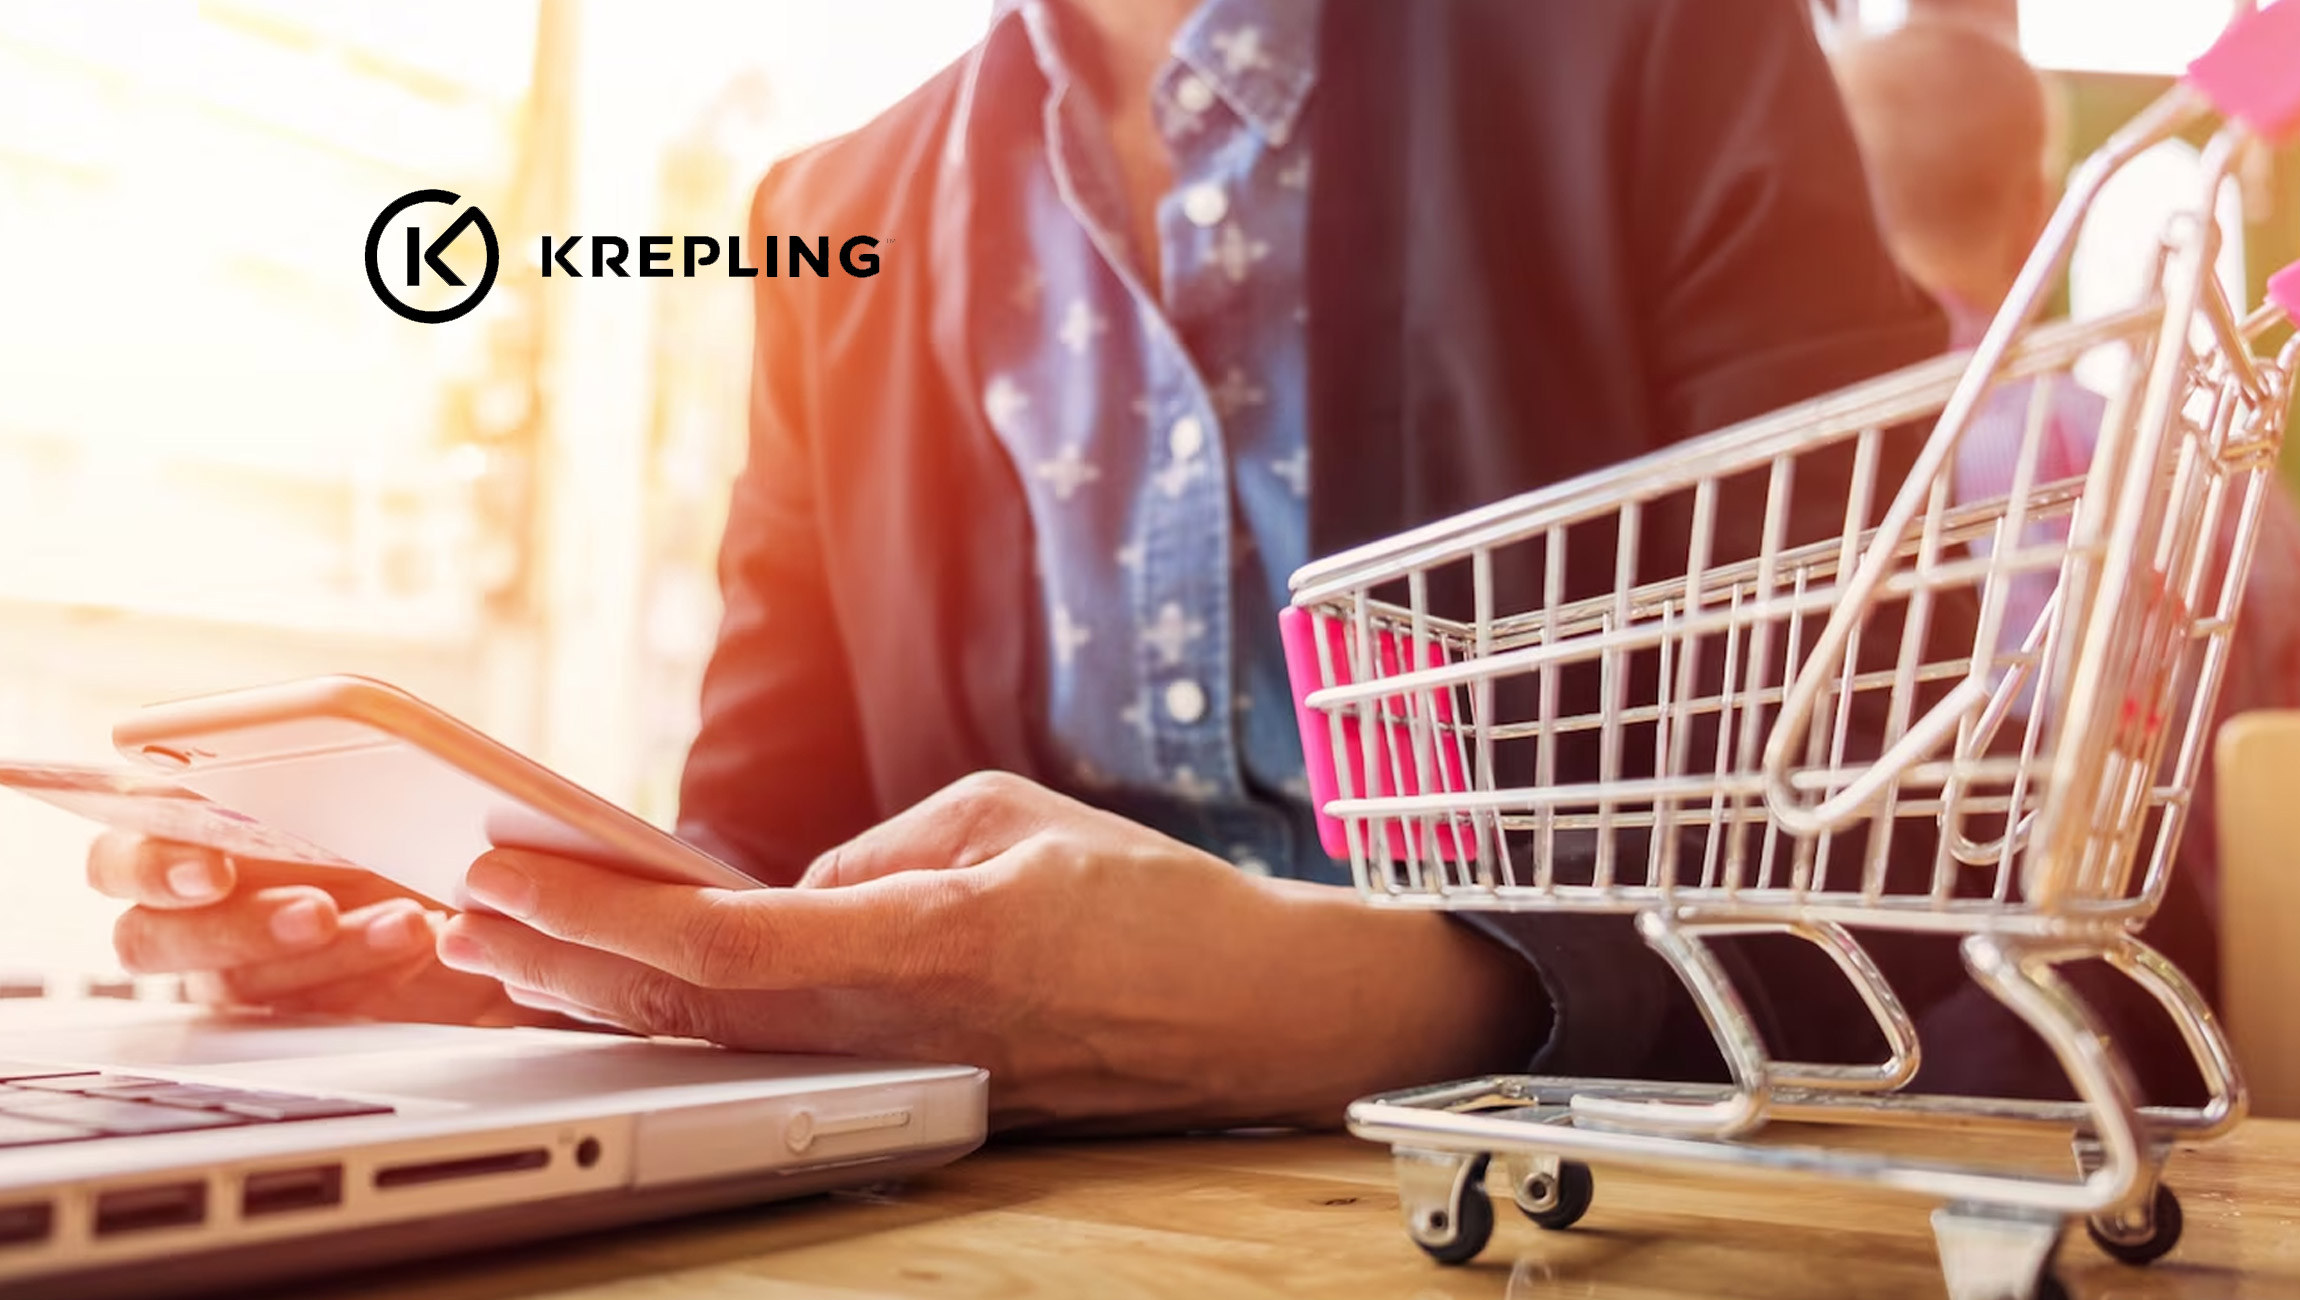 Krepling-Pay-Launch-Enables-Seamless-One-Click-Checkout-Process-for-Merchants